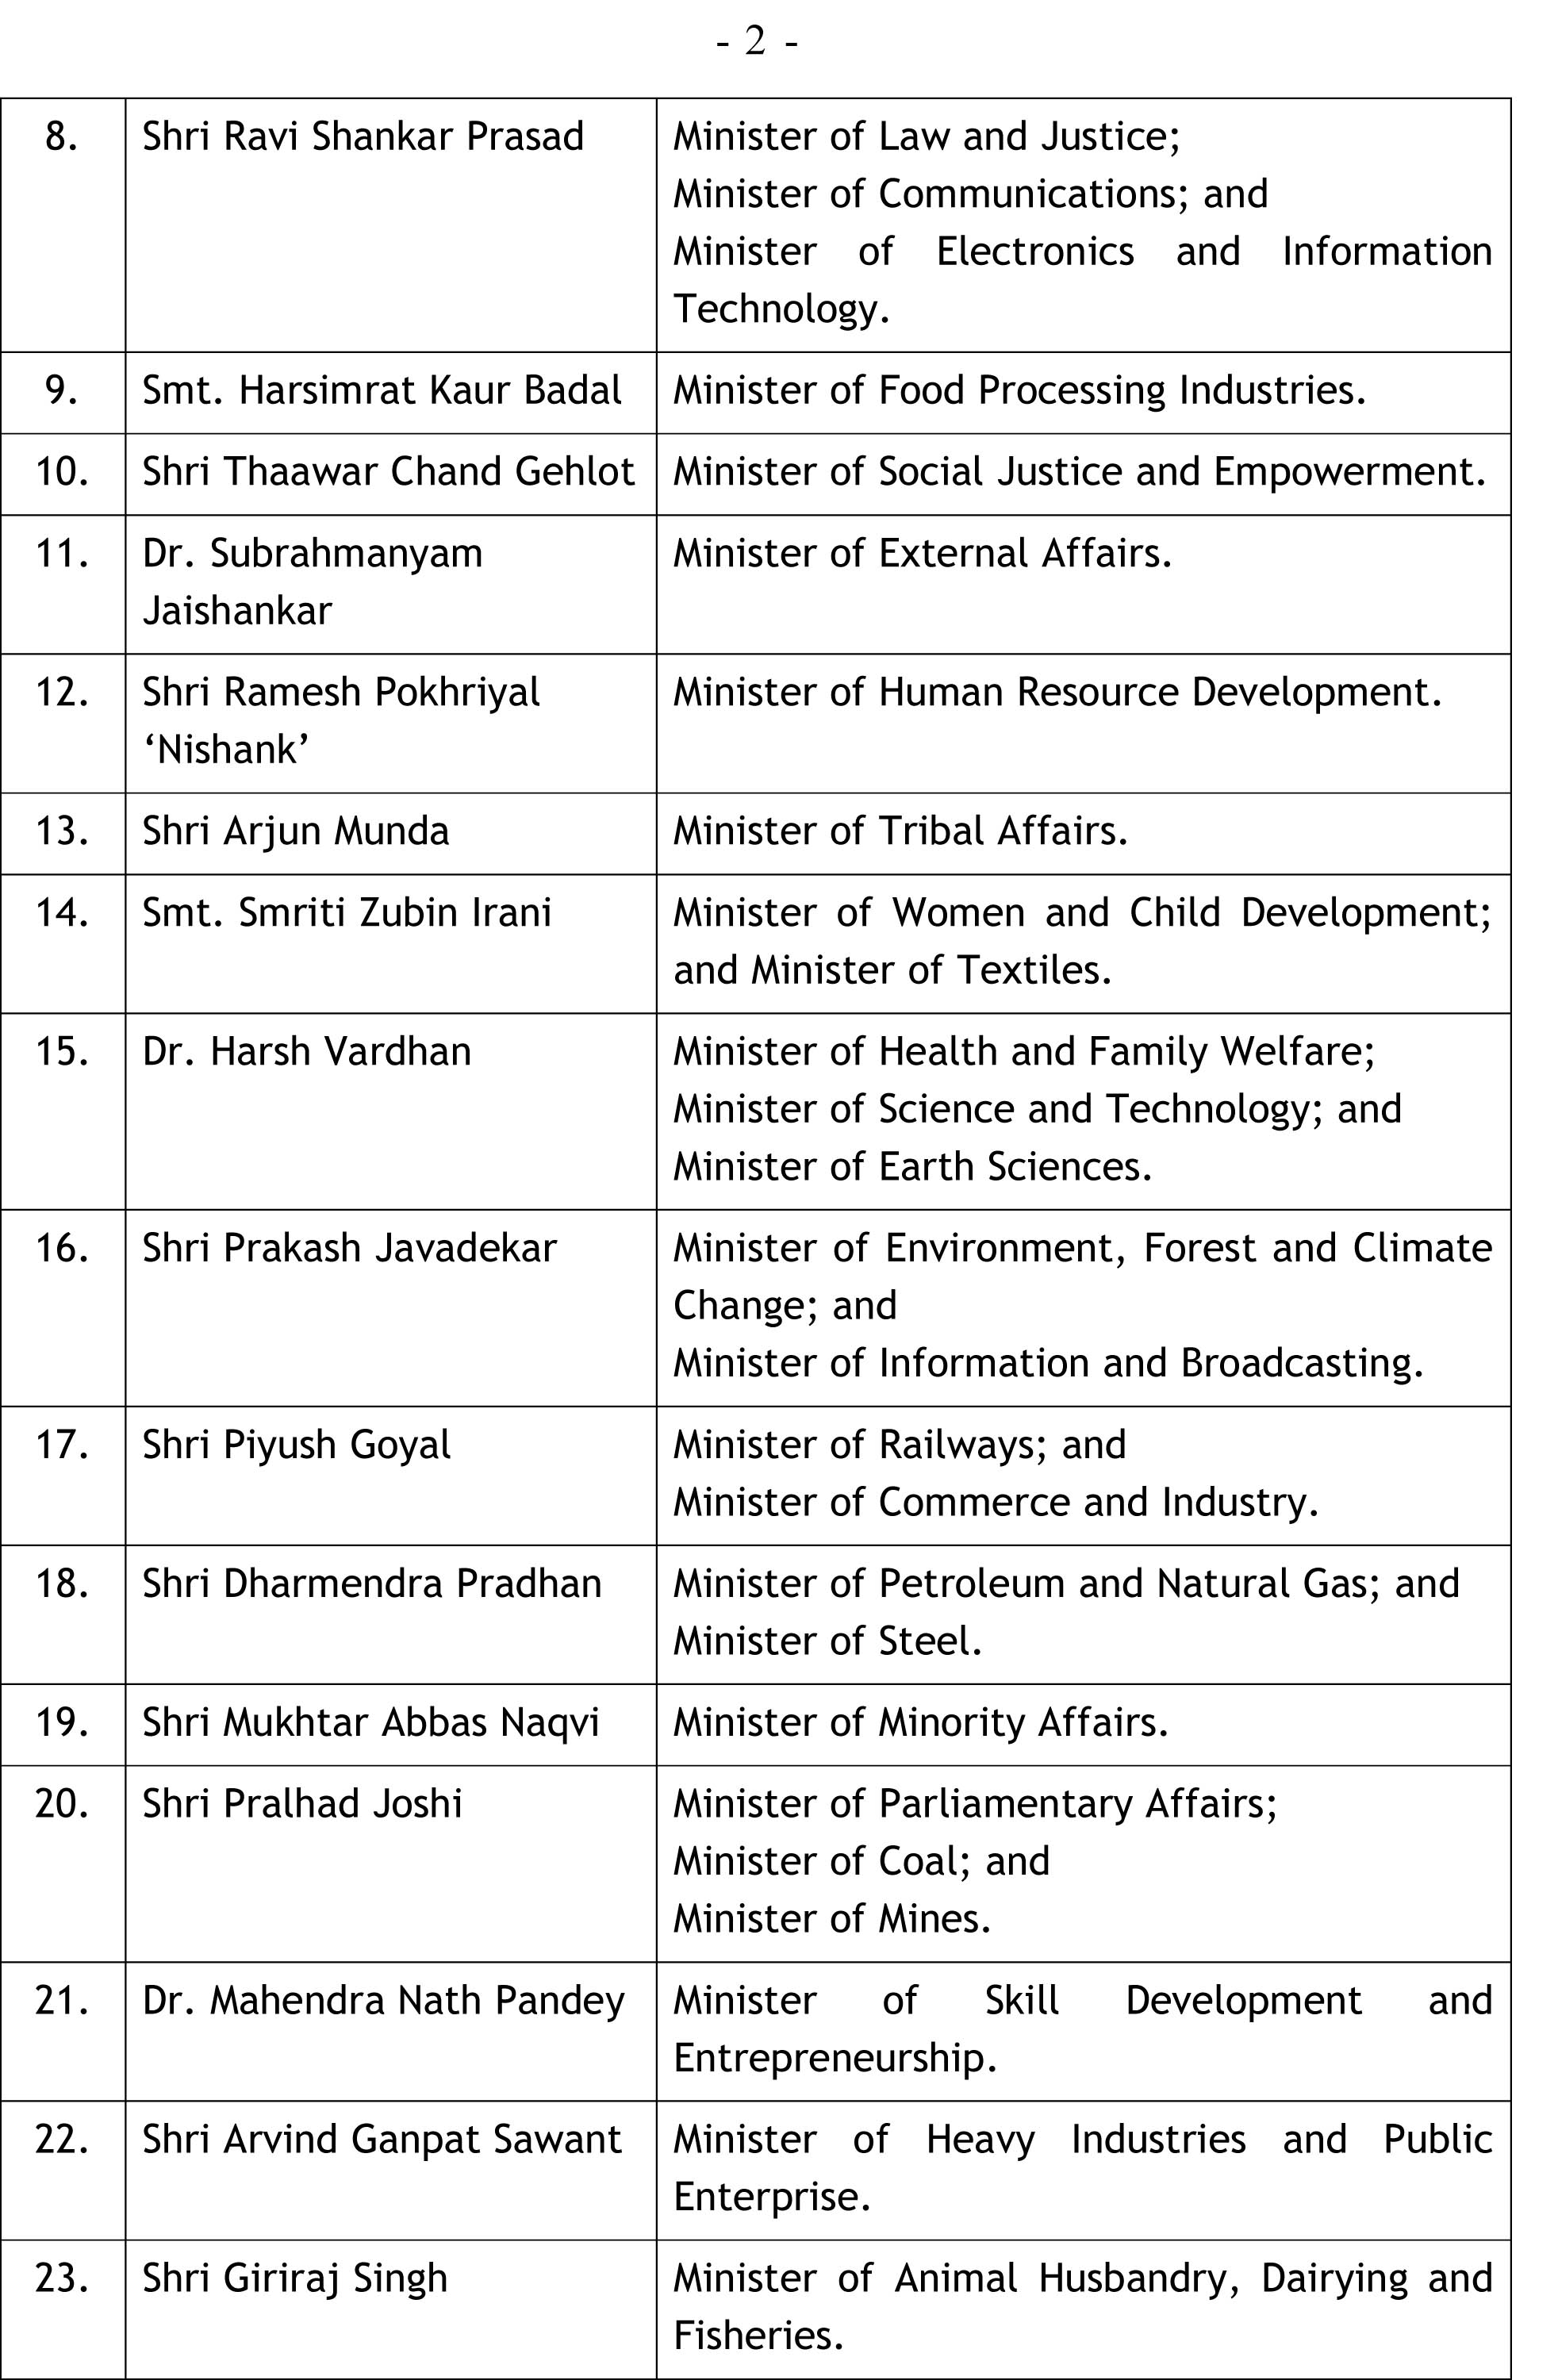 The division of the ministries in the Modi Cabinet